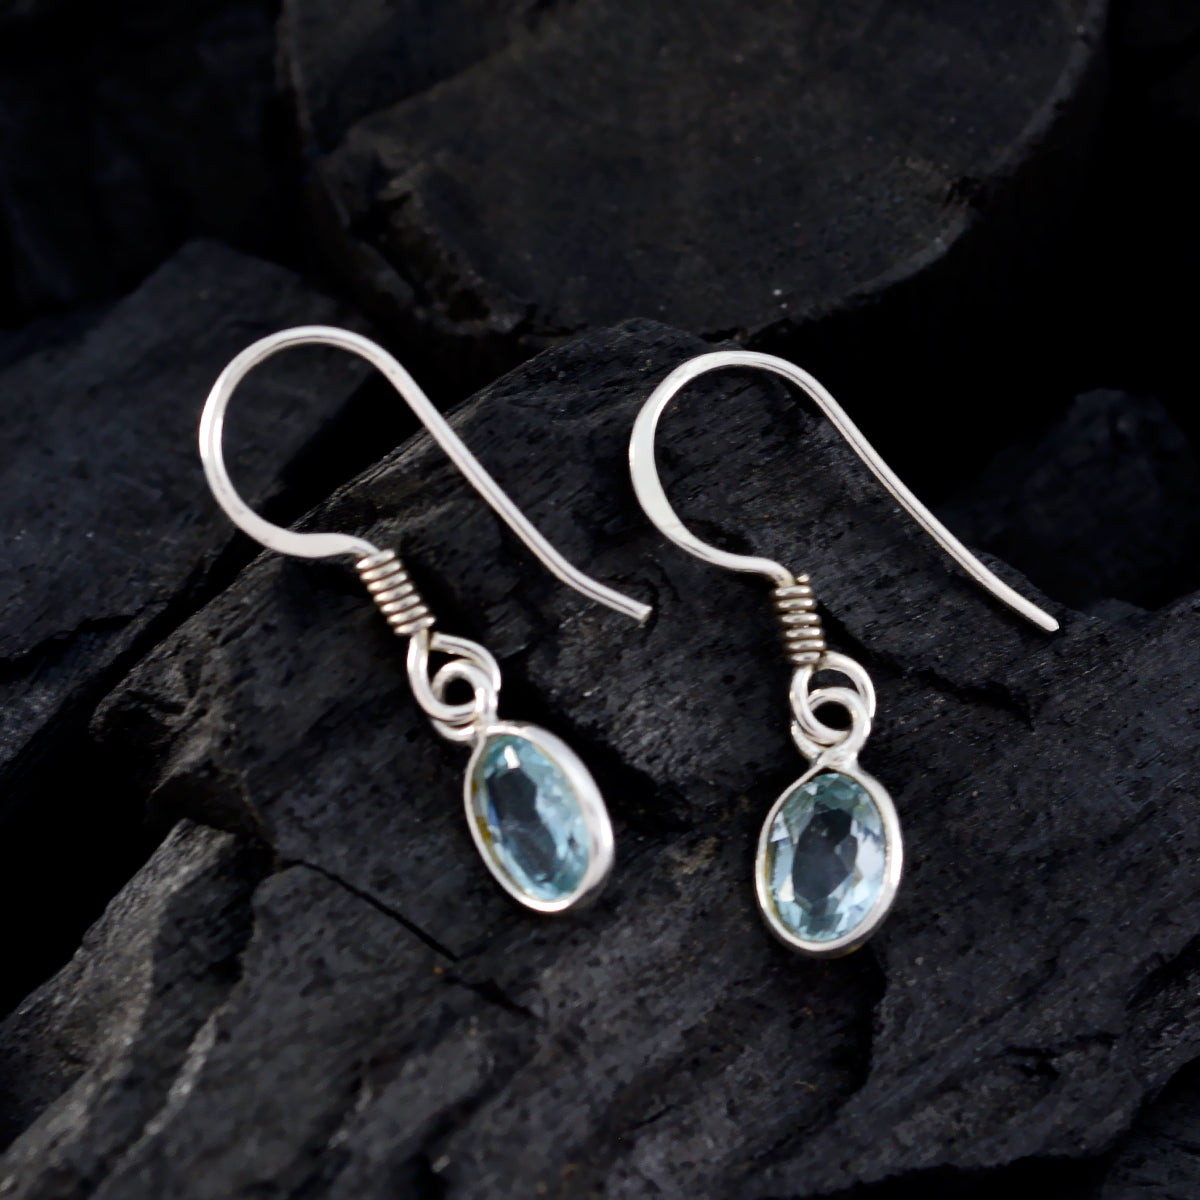 Riyo Good Gemstones round Faceted Blue Topaz Silver Earrings gift fordaughter day